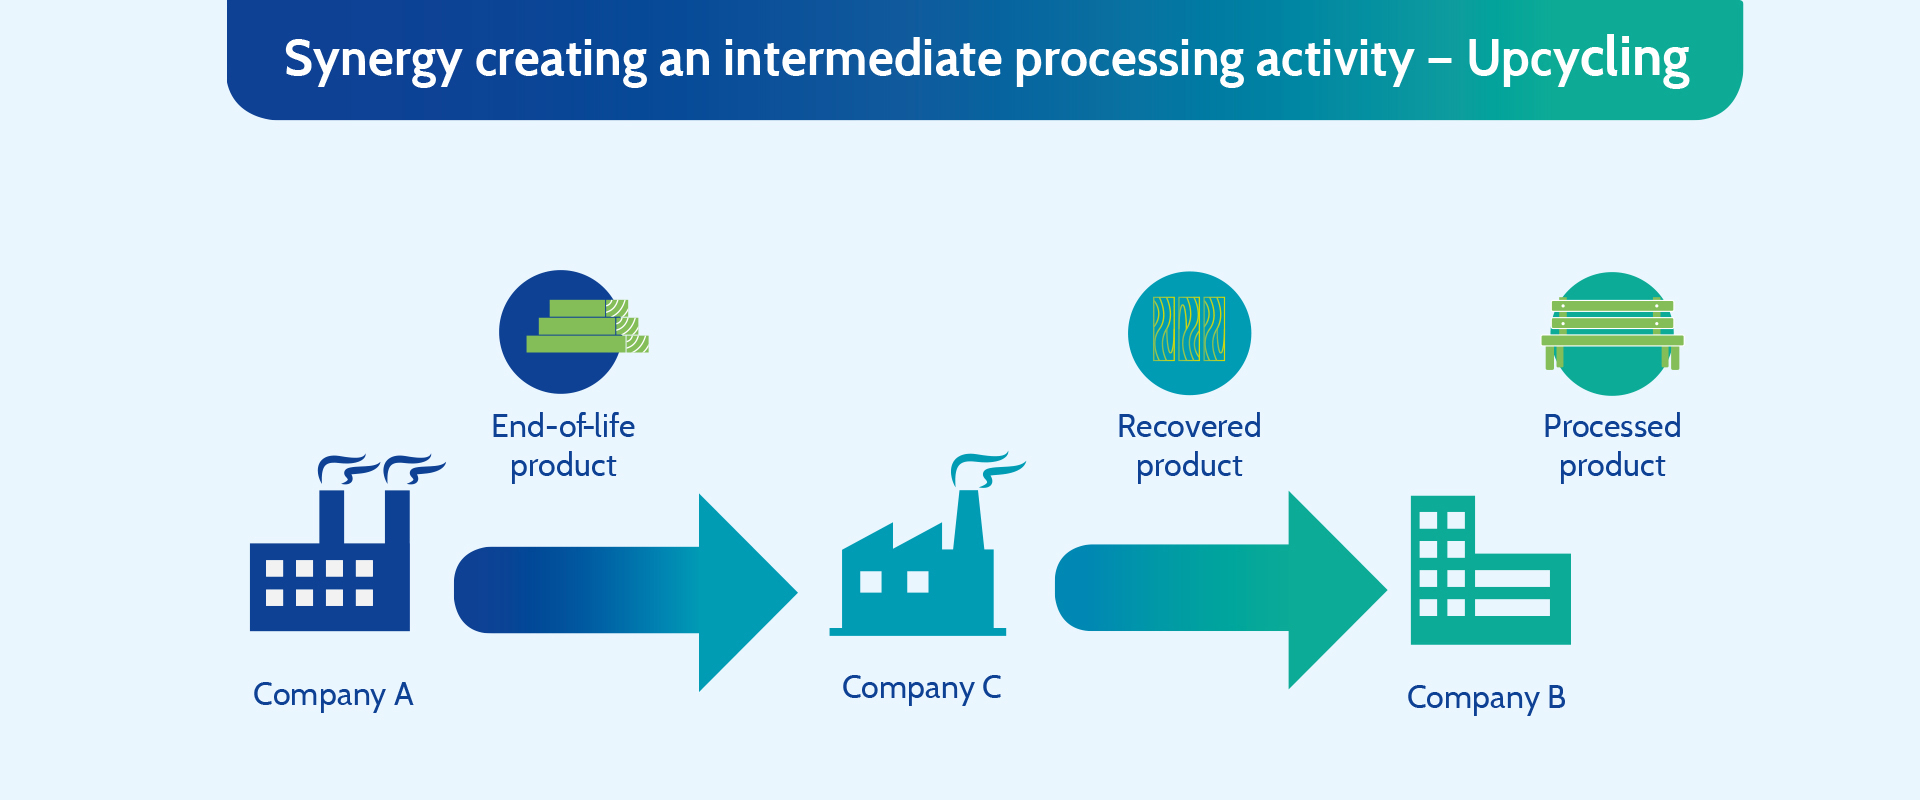 Creating an intermediate processing activity